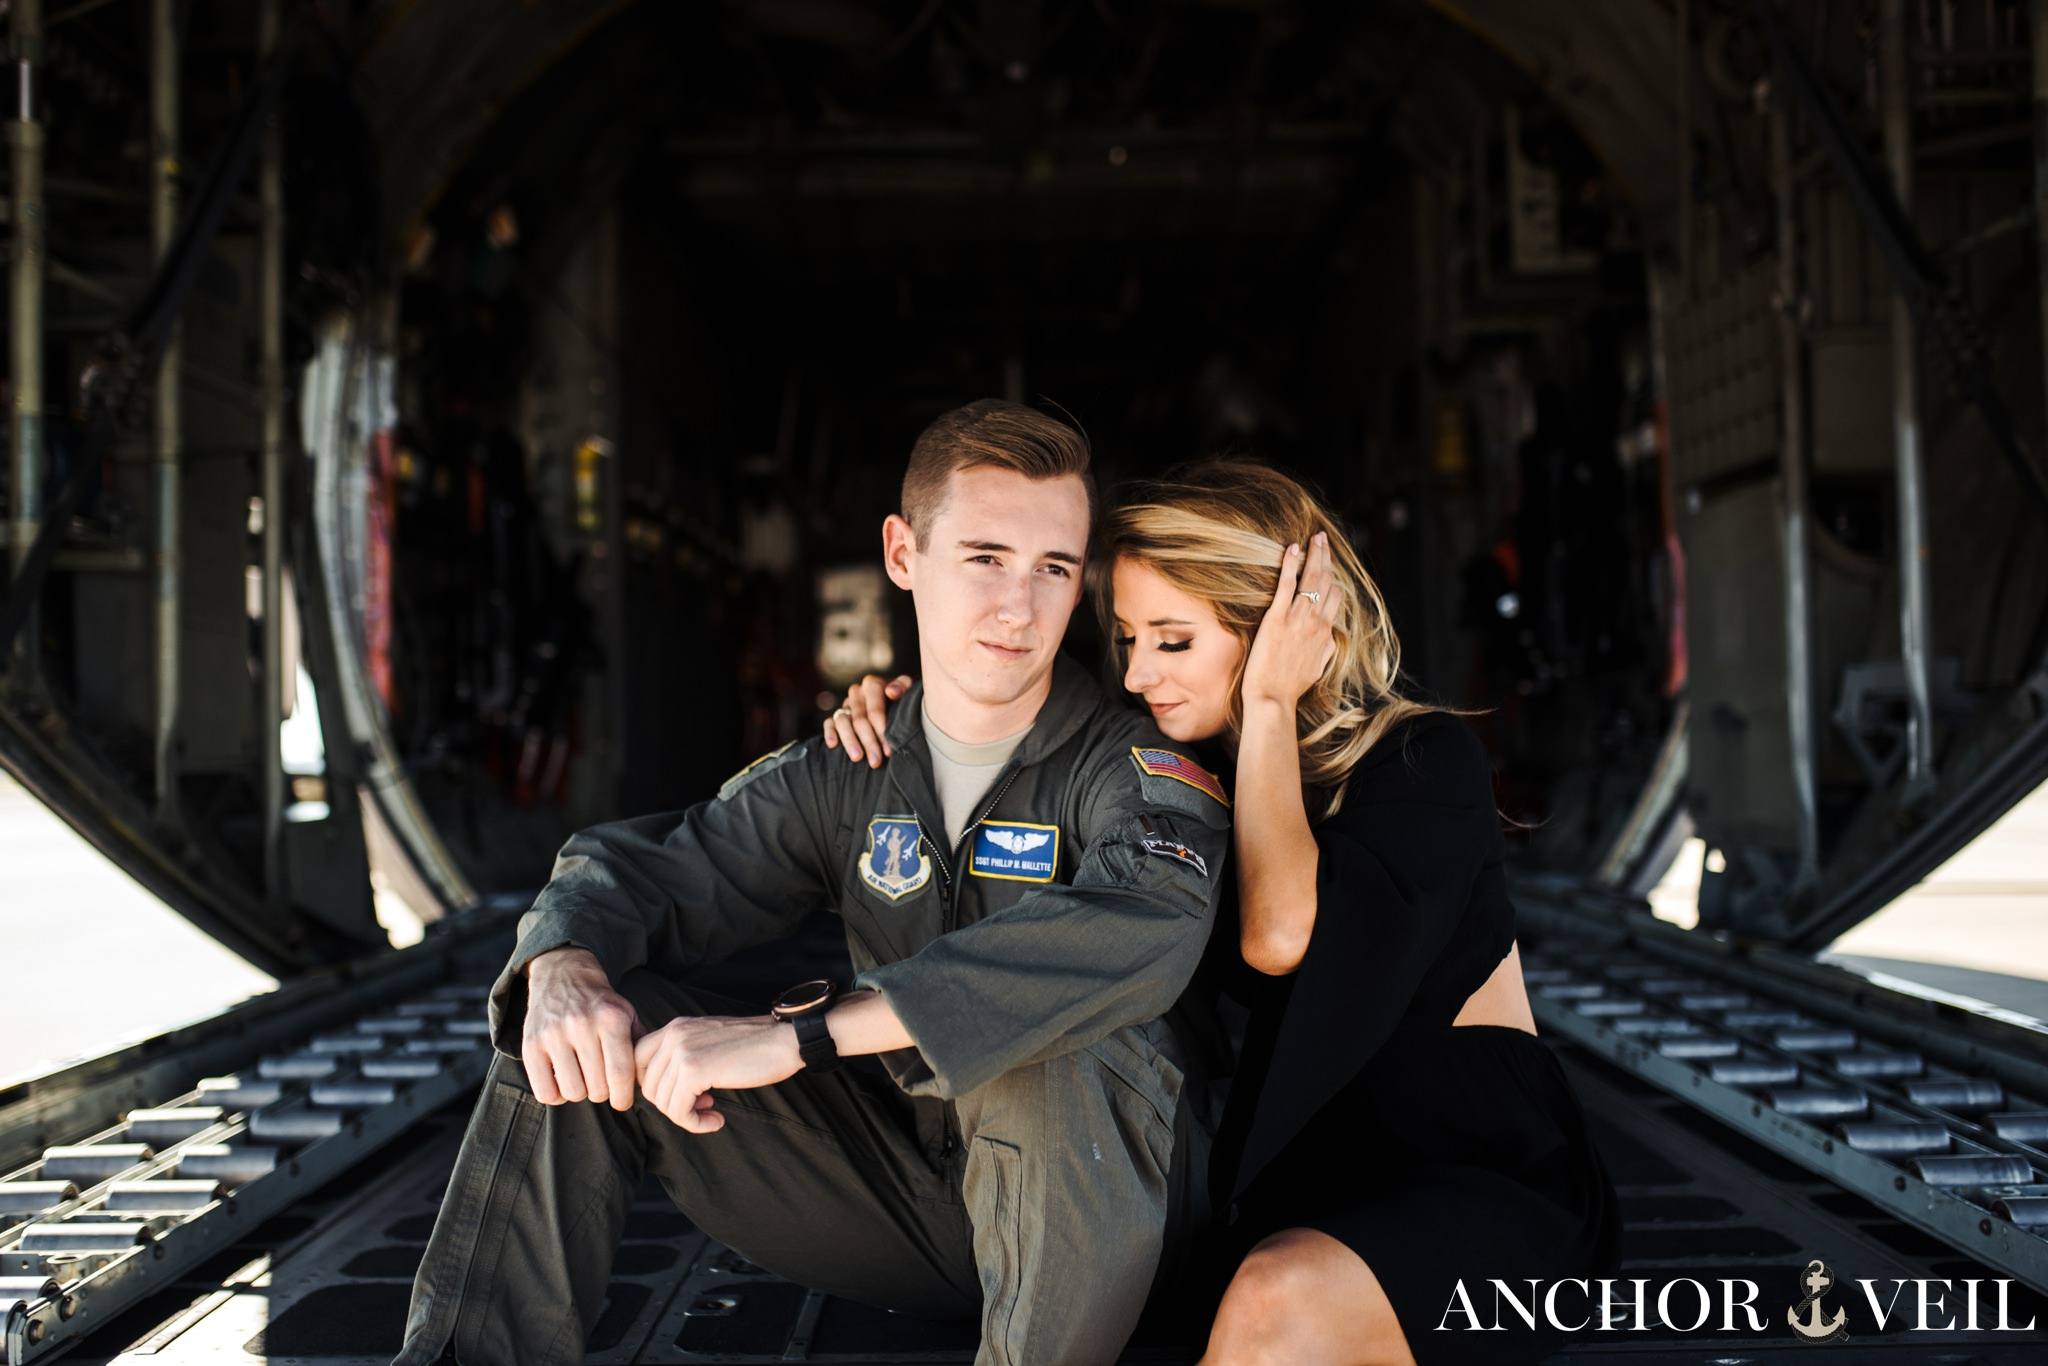 running hands through hair during the aviation themed engagement session in Charlotte NC